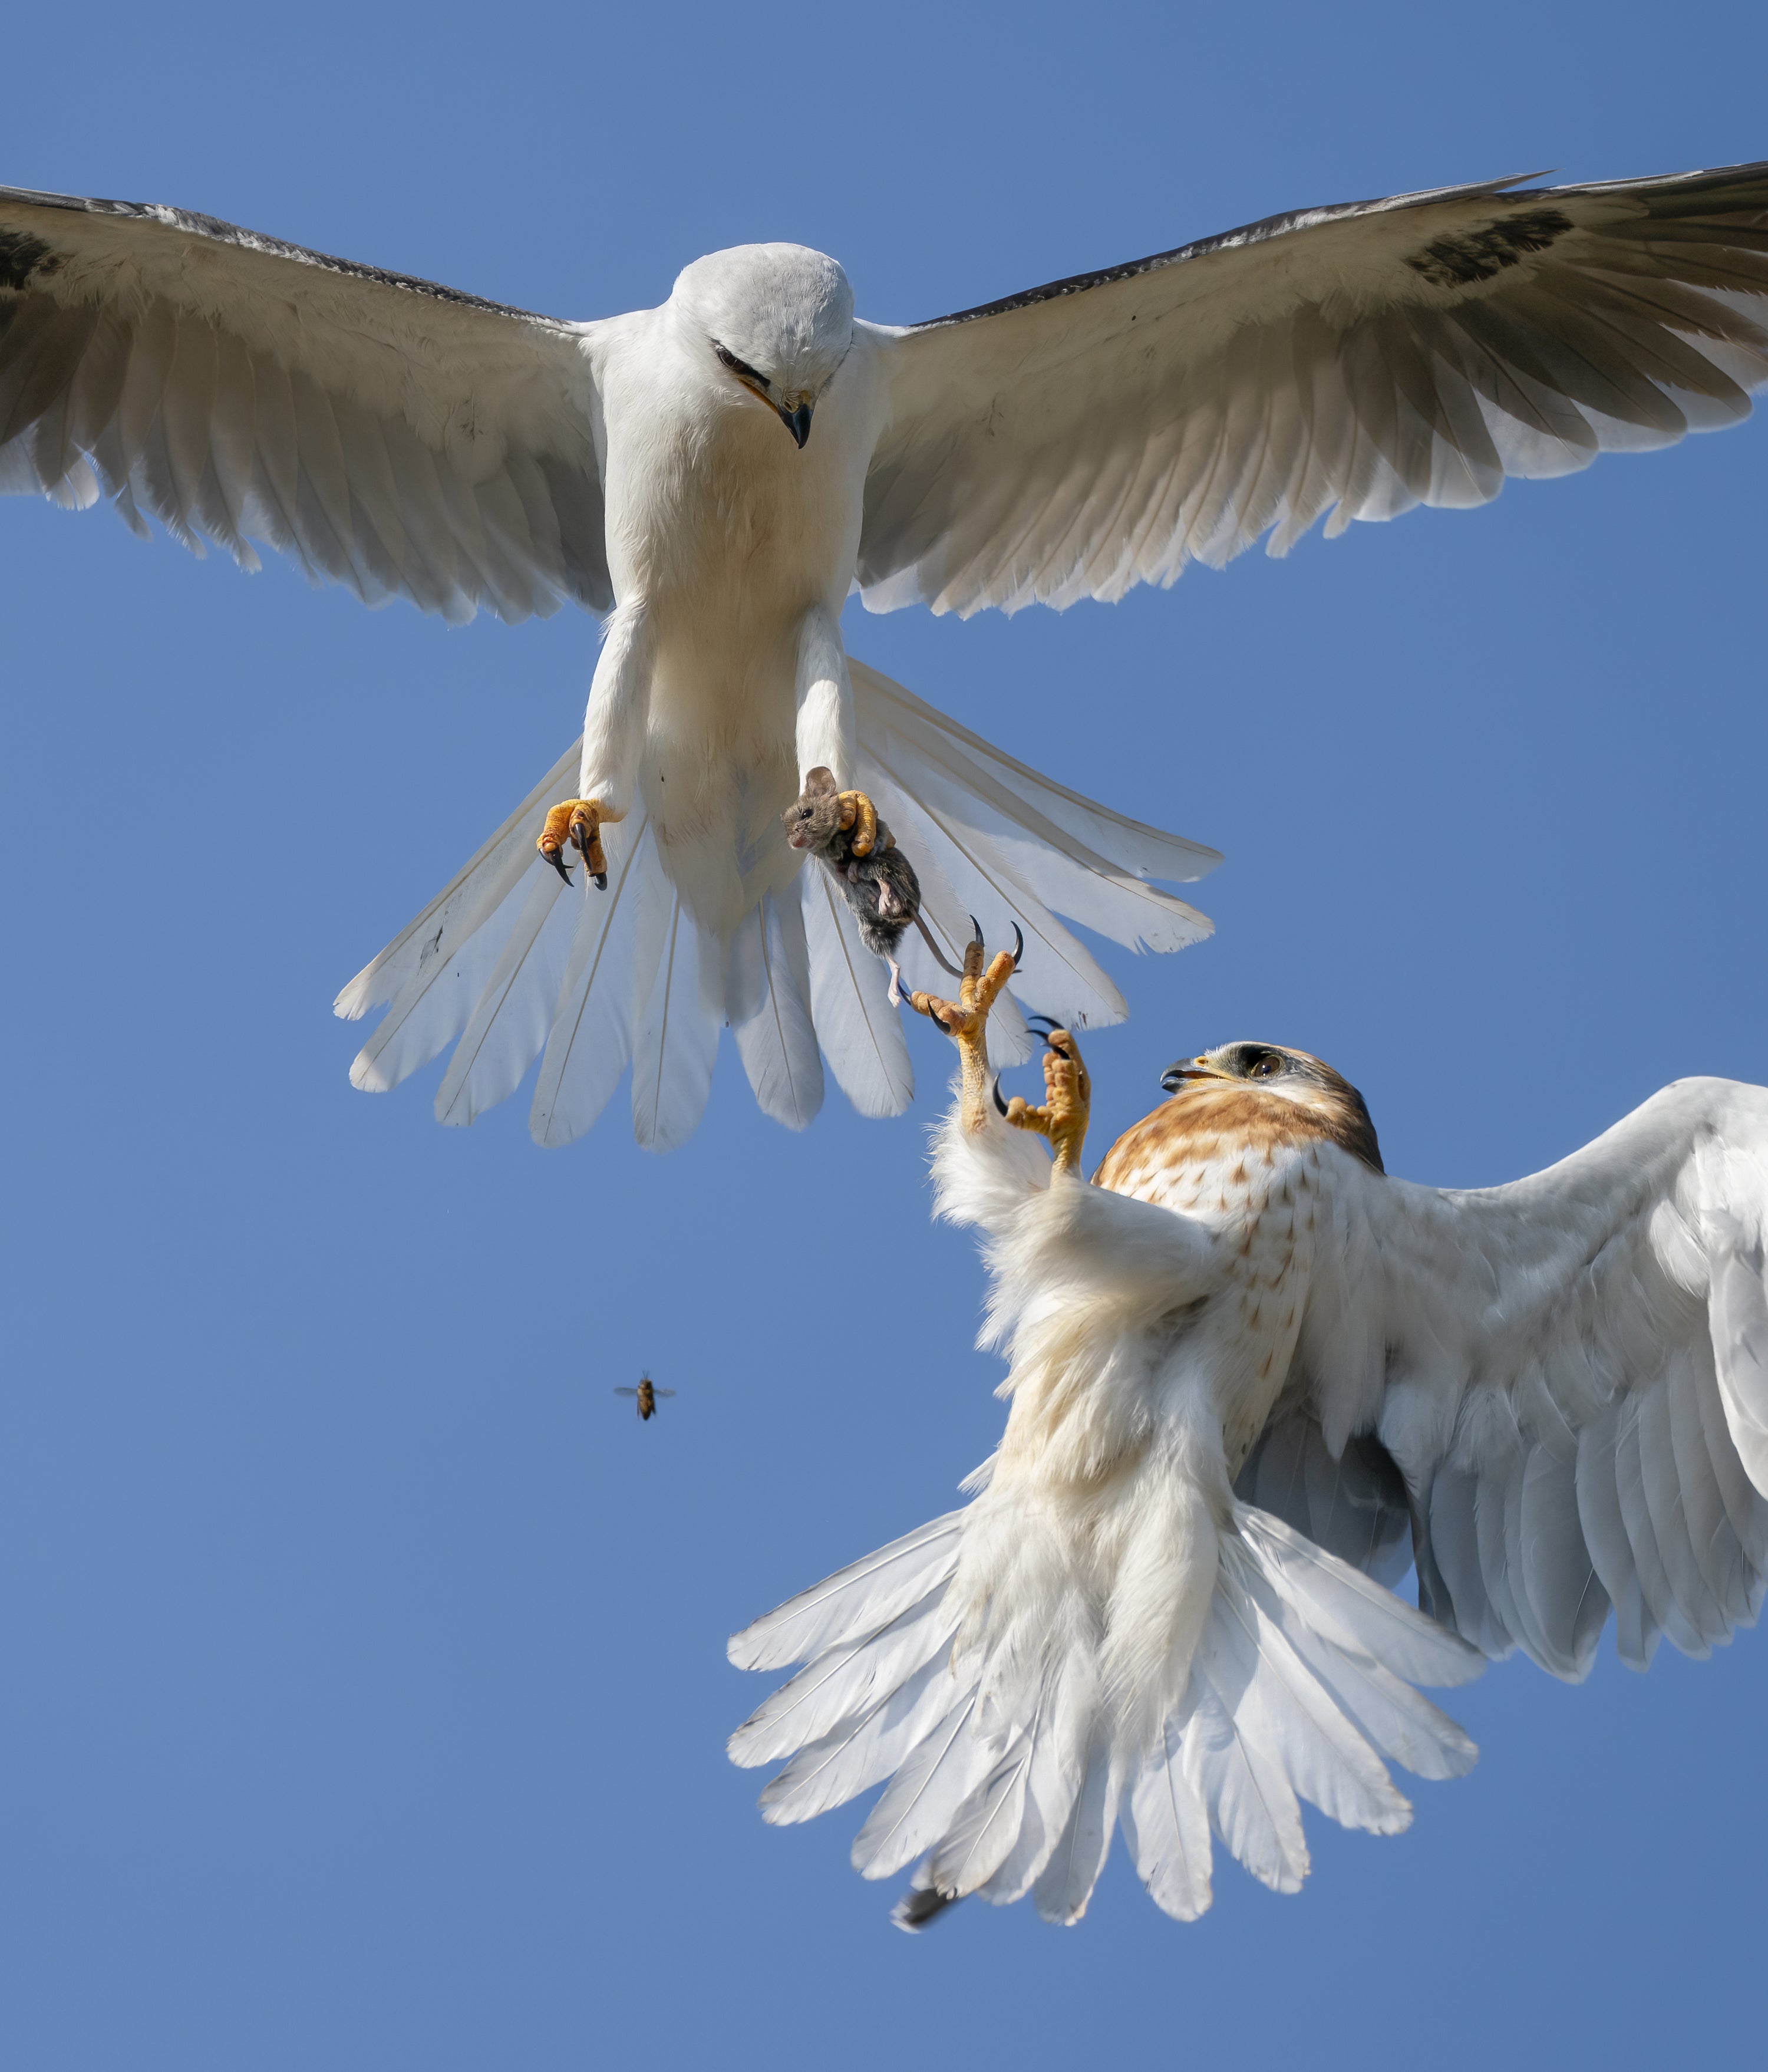 Up for grabs by Jack Zhi (Jack Zhi/Wildlife Photographer of the Year)